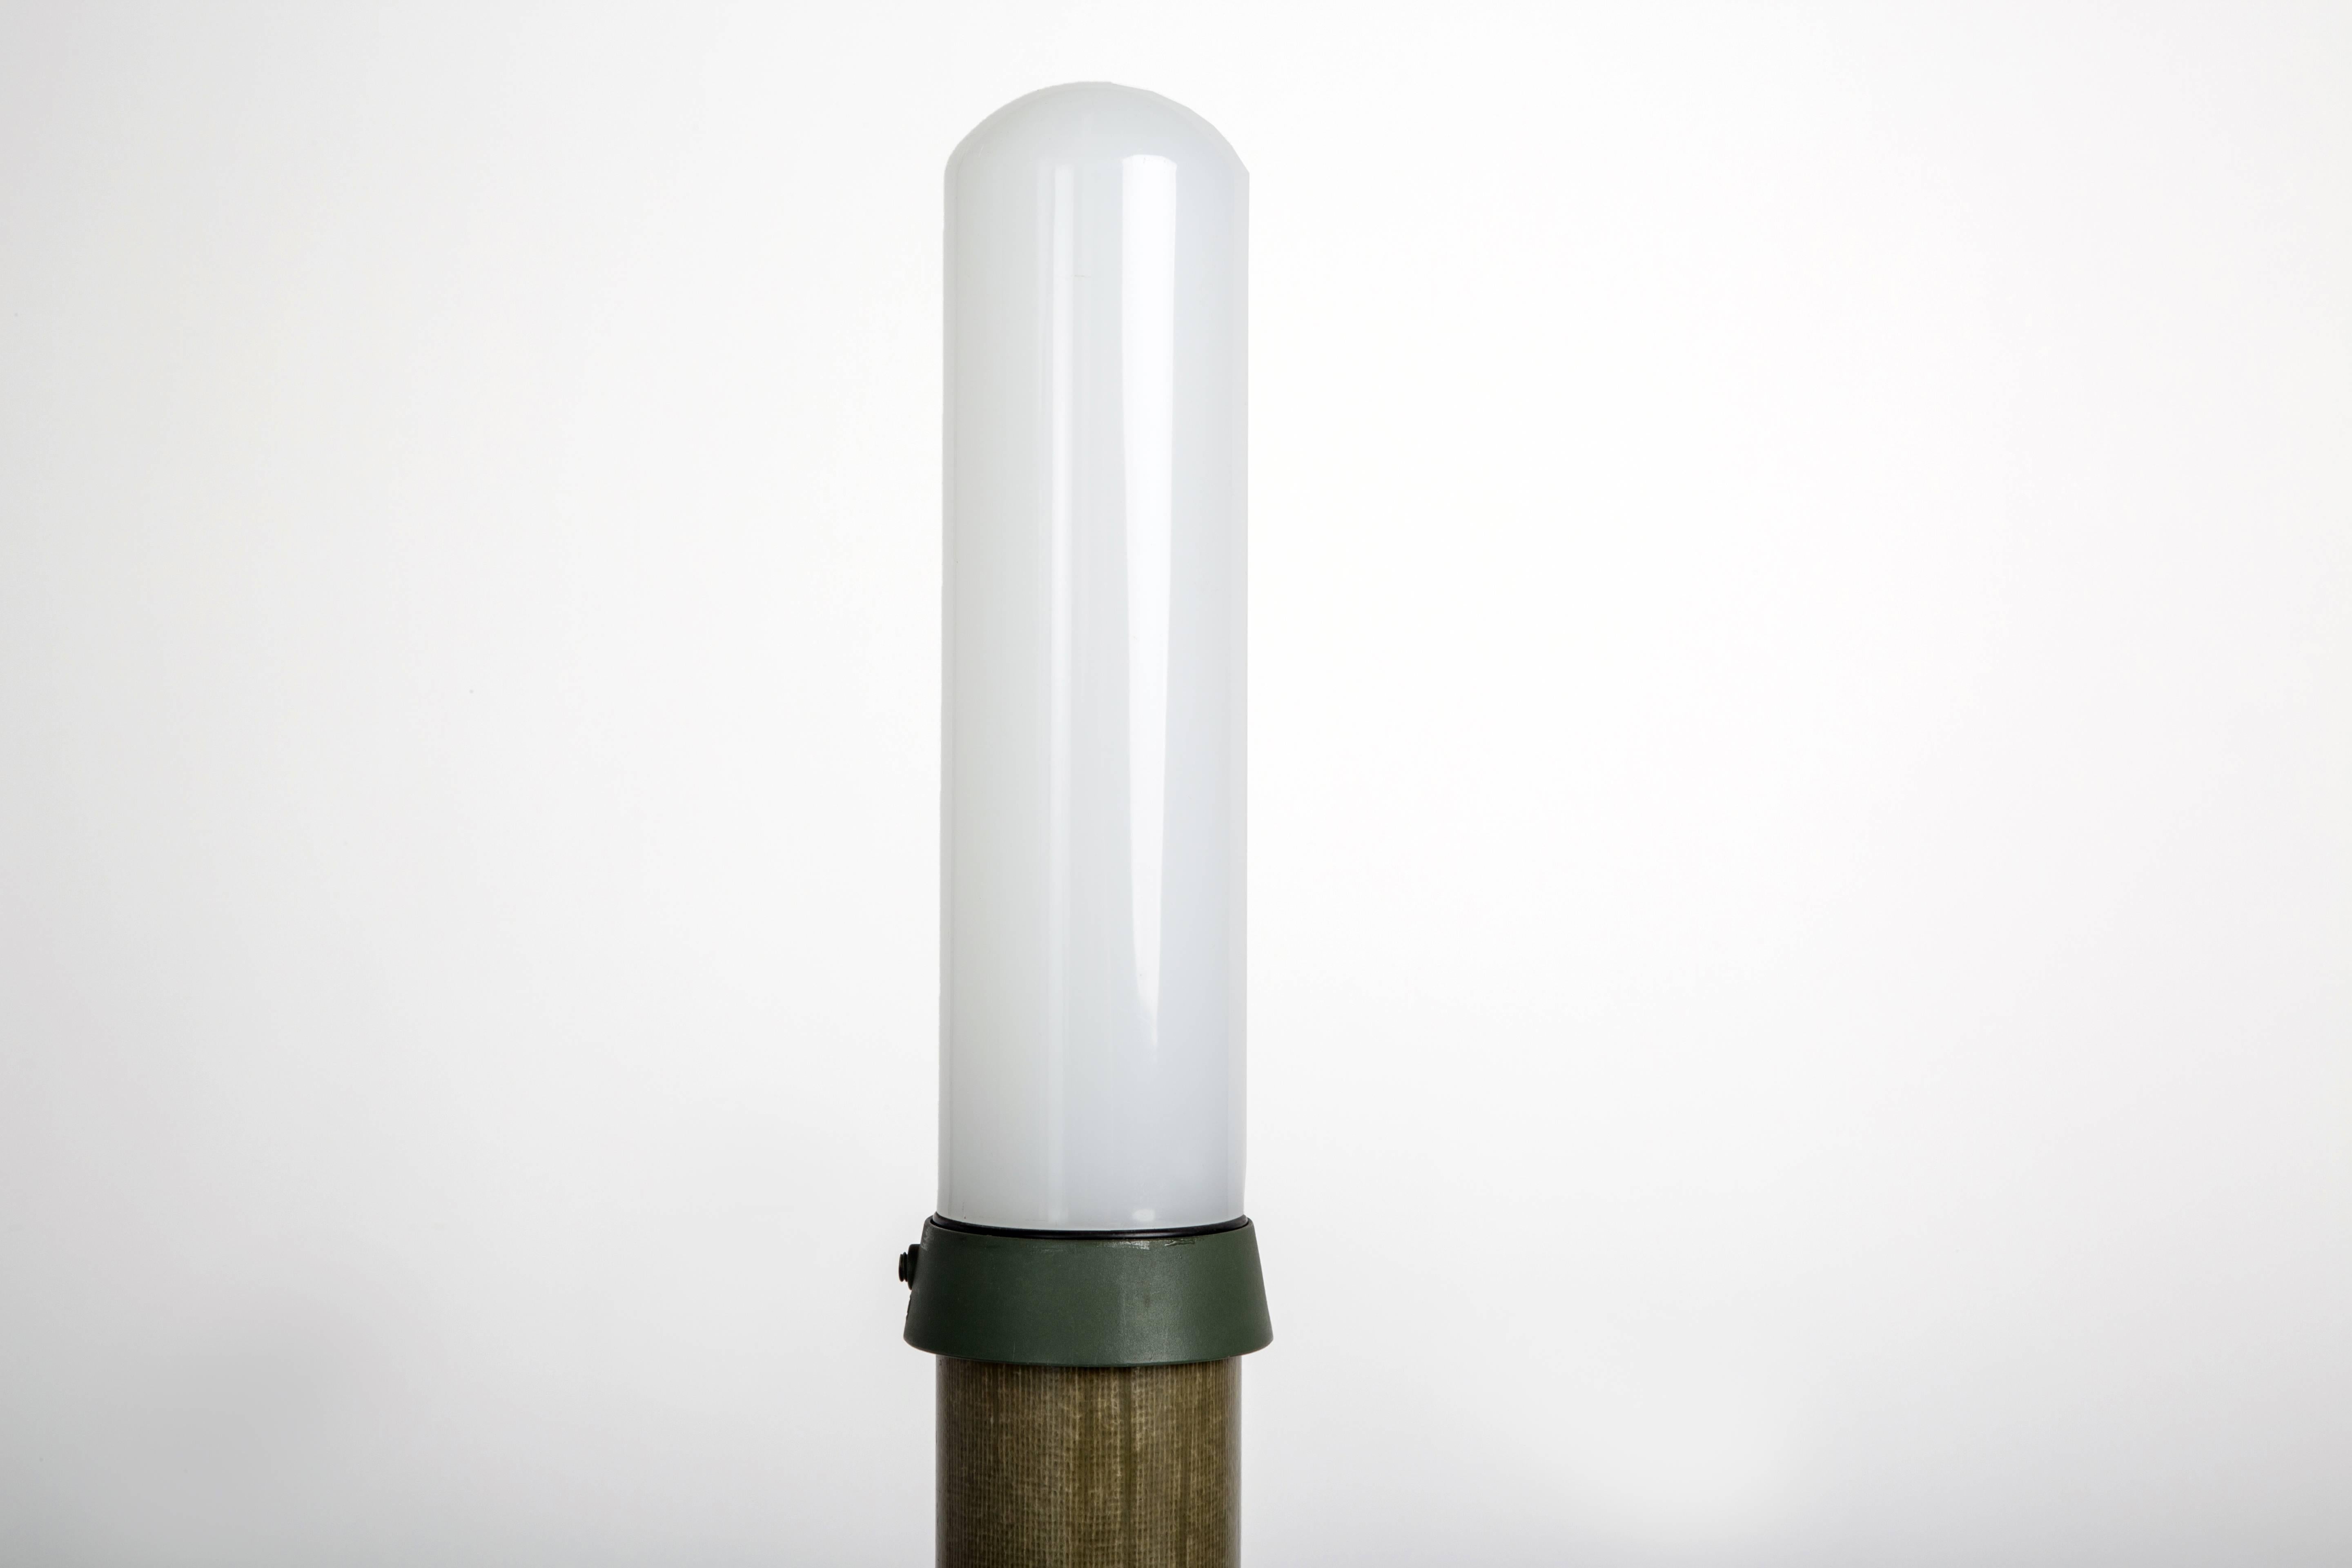 Unusual vintage green standing lamp with frosted diffuser, patinated metal base, modeled green laminate skin. 

Newly rewired to US standards. Acrylic diffuser replaced with new custom glass diffuser. 